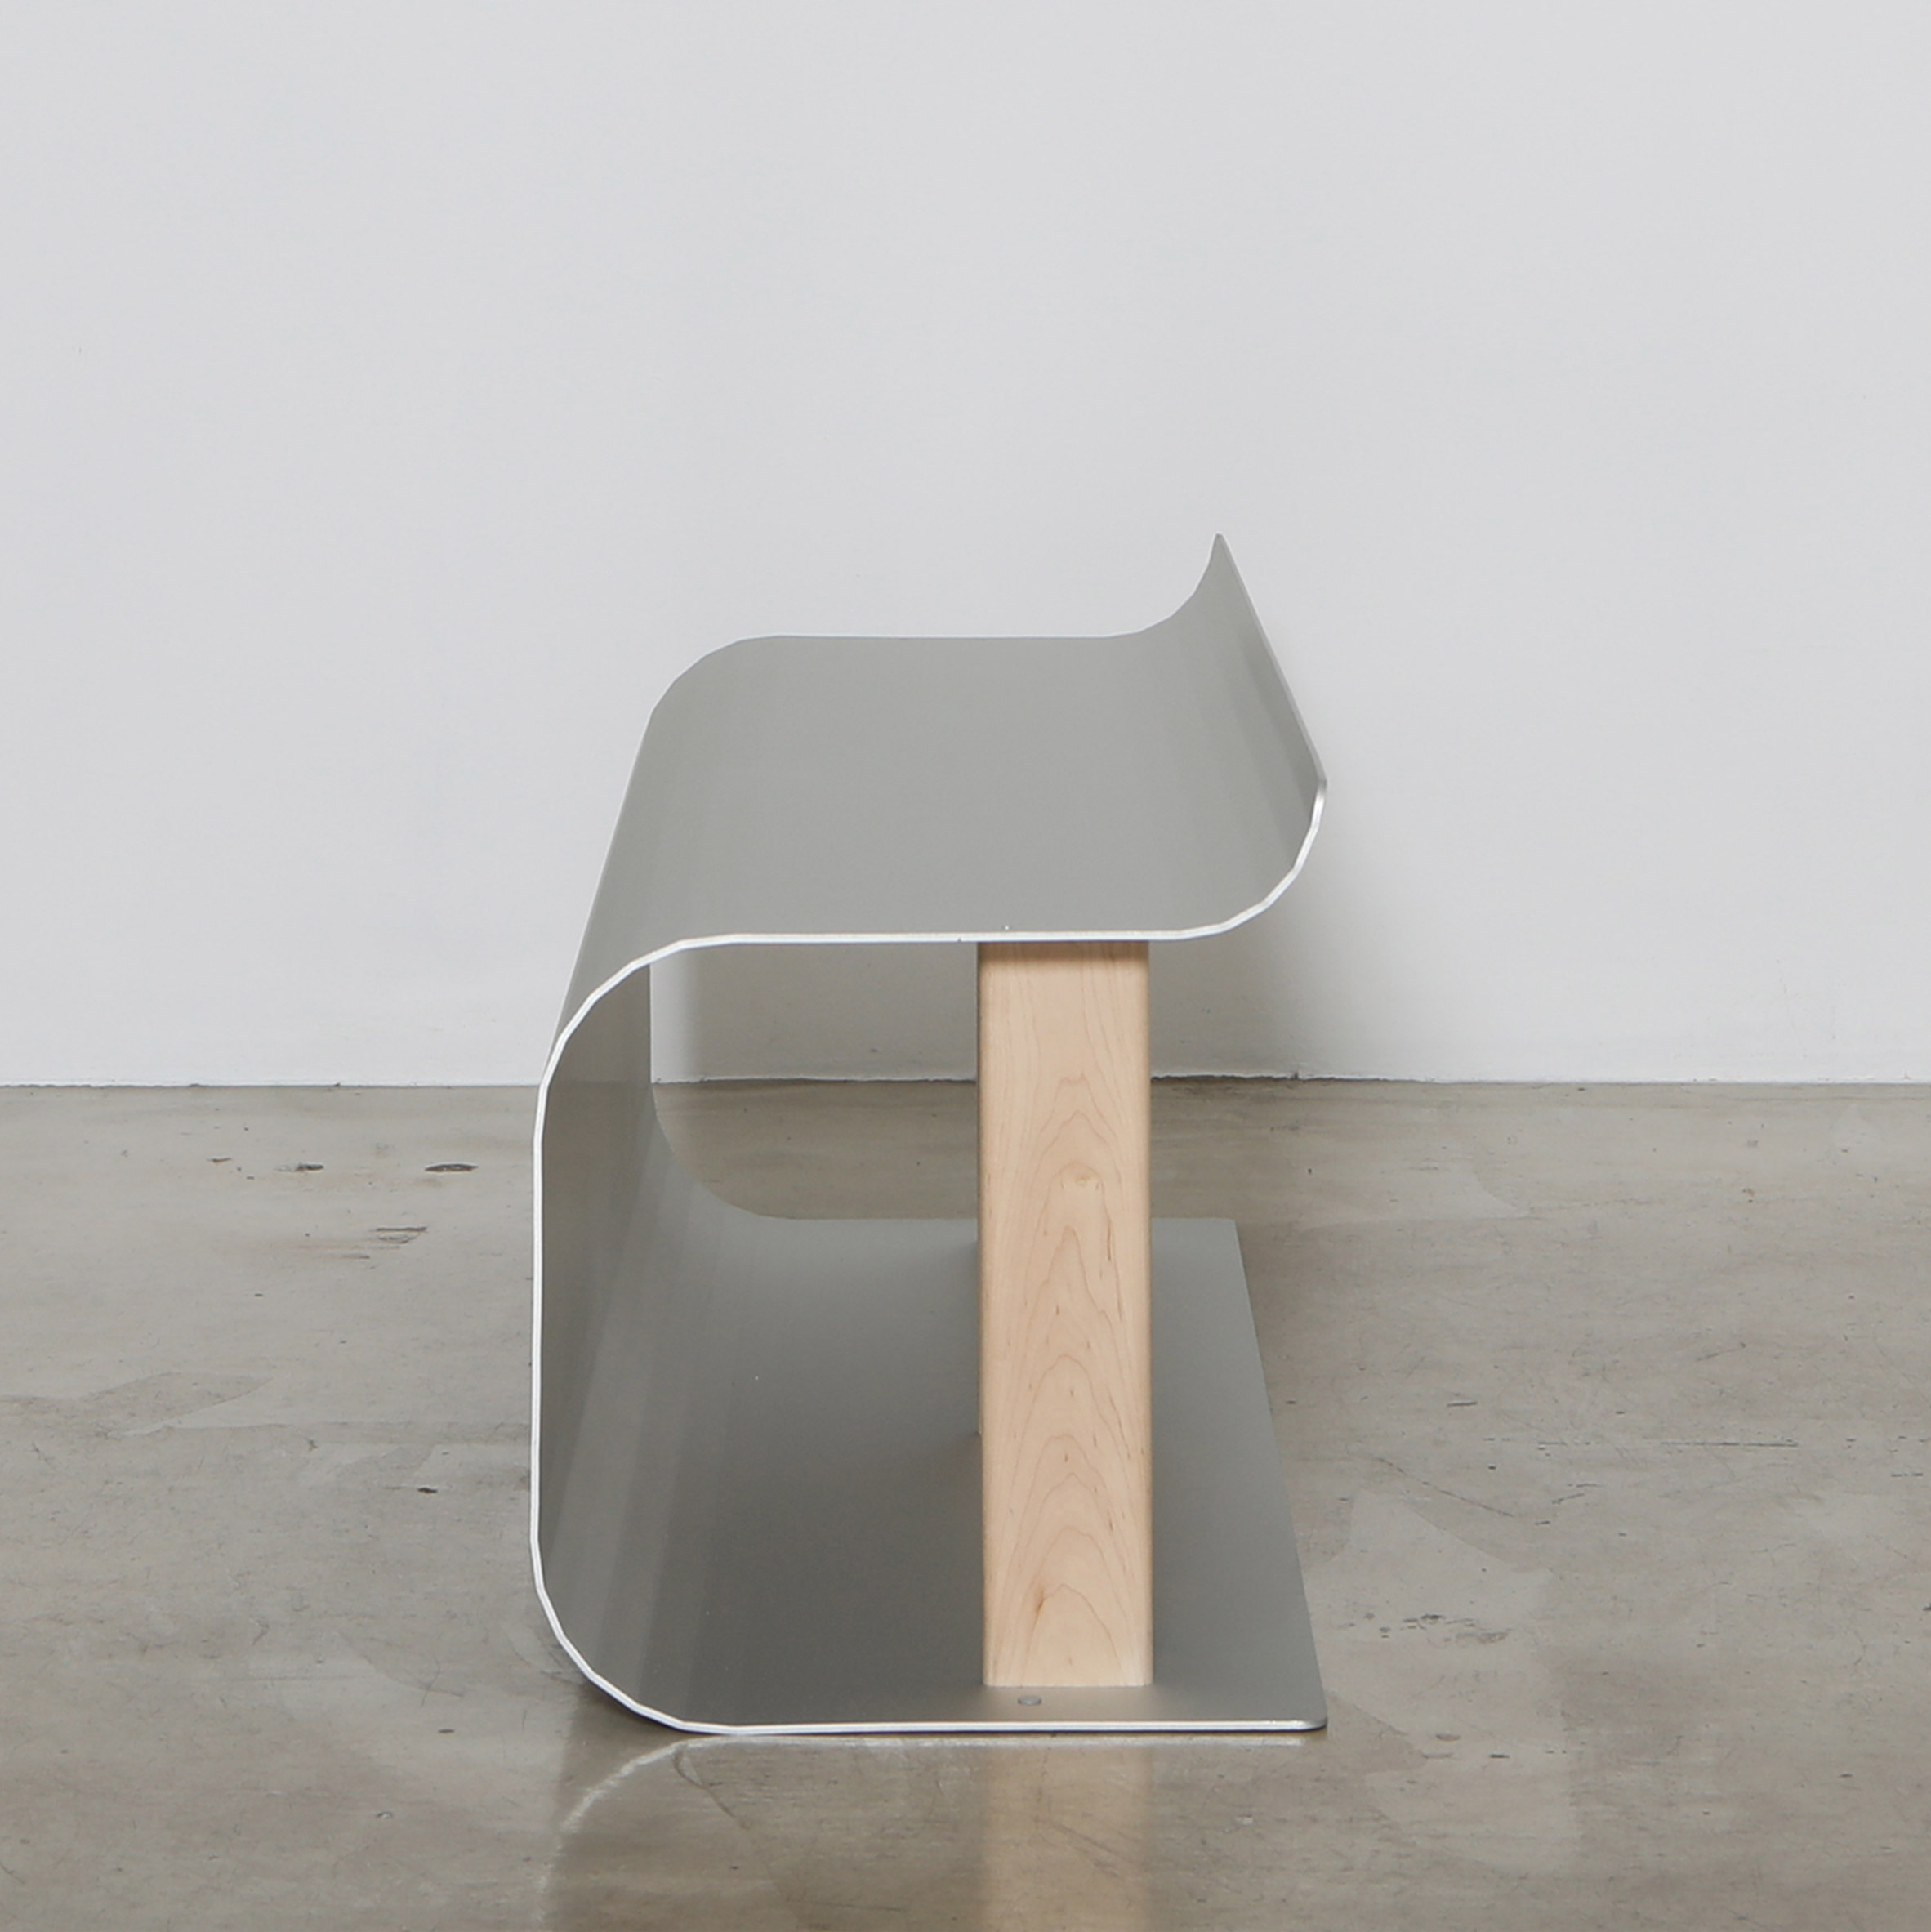 Useful Workshop's Curvature furniture is made from pressed sheet metal